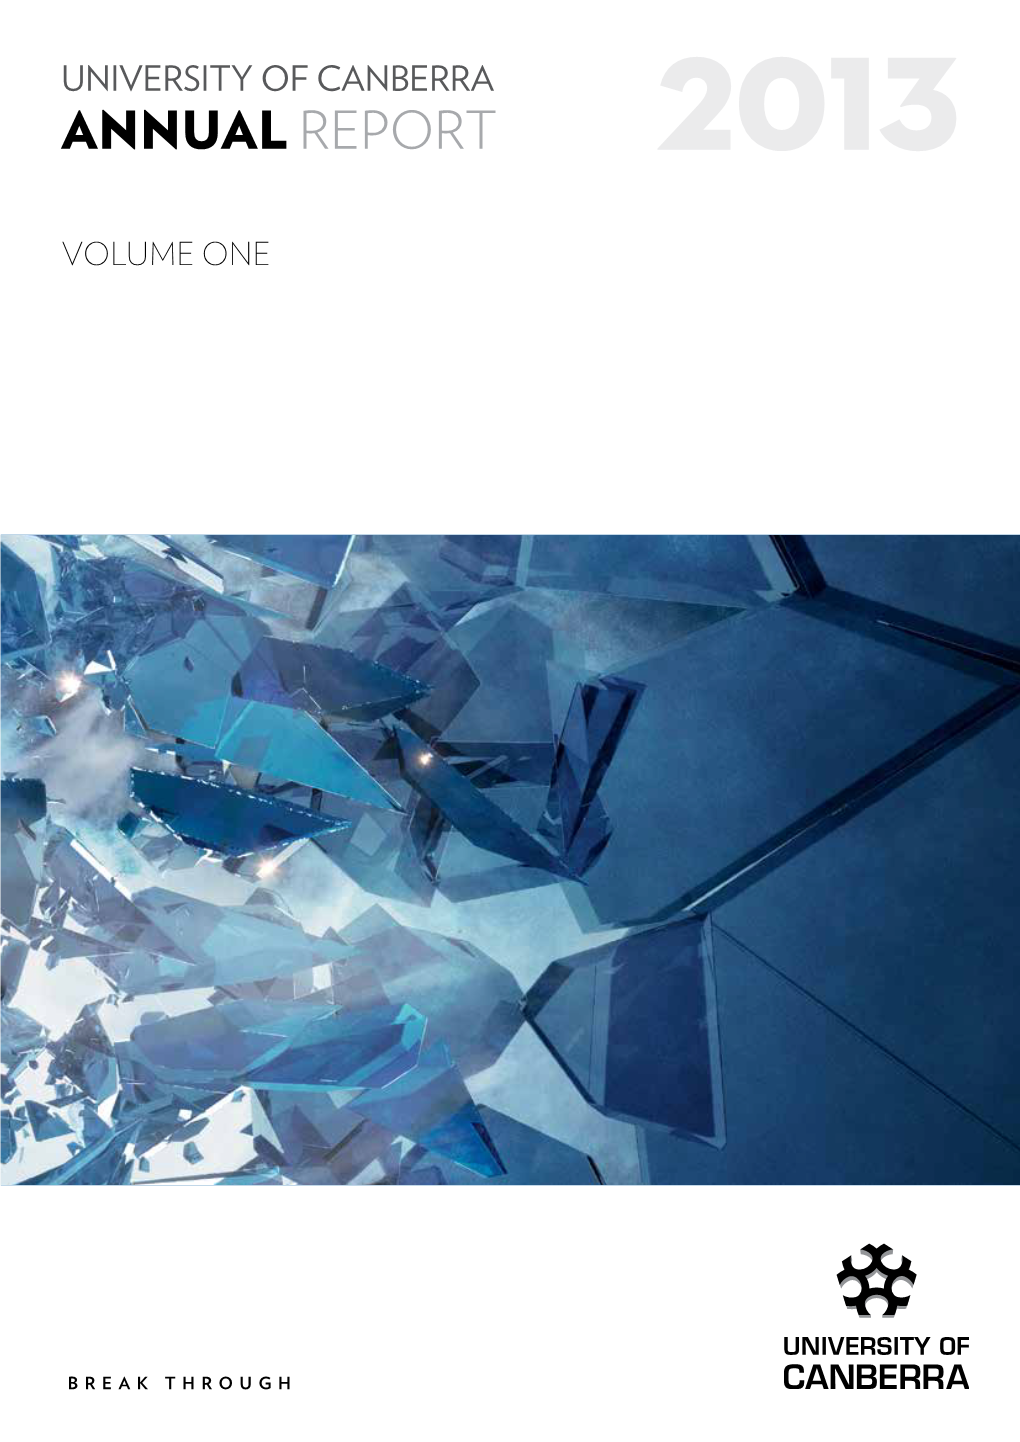 University of Canberra ANNUAL REPORT 2013 Volume One